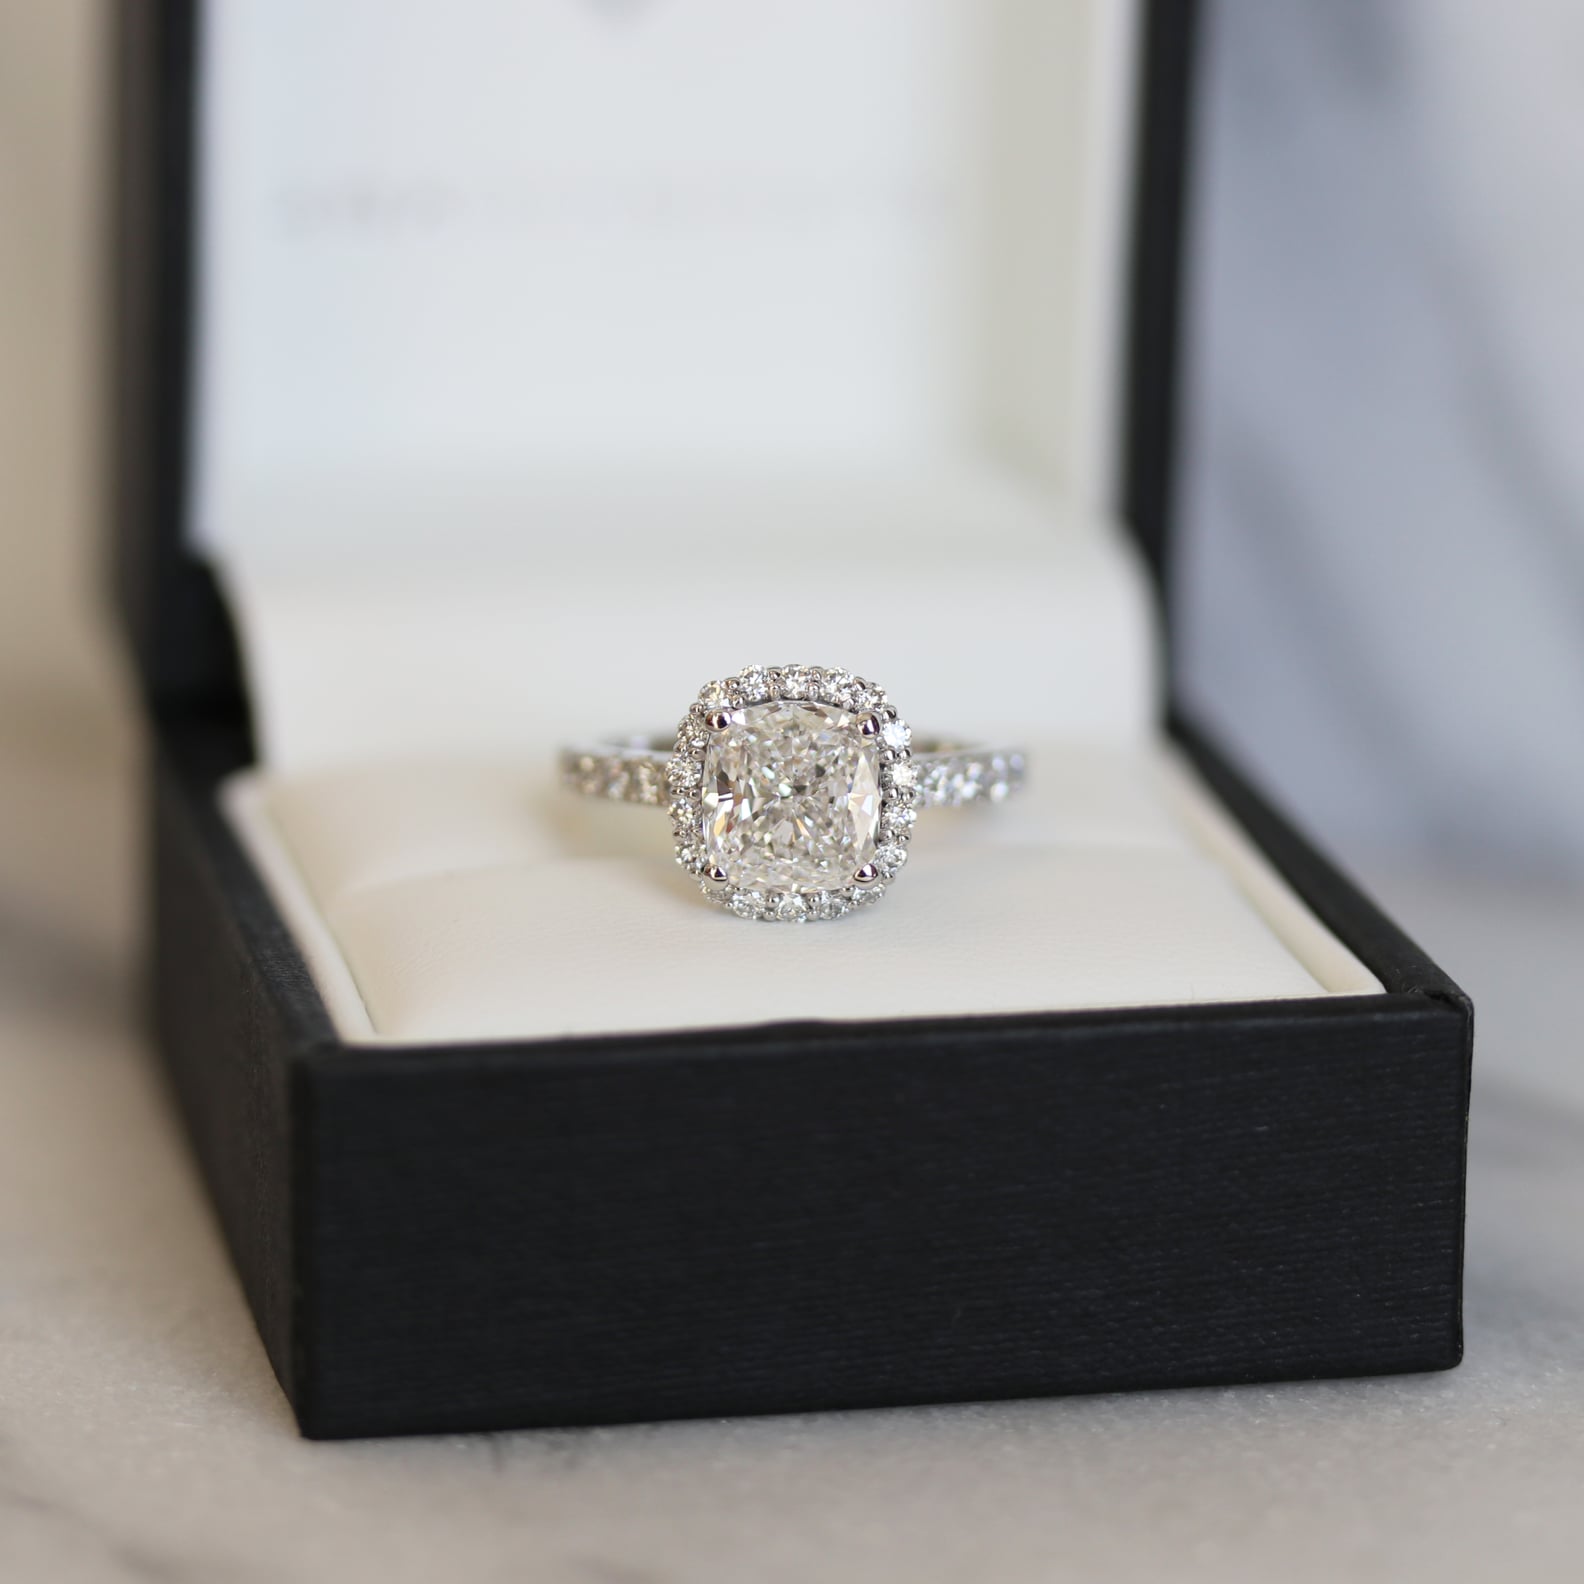 Engagement Rings by Decade | POPSUGAR Love & Sex